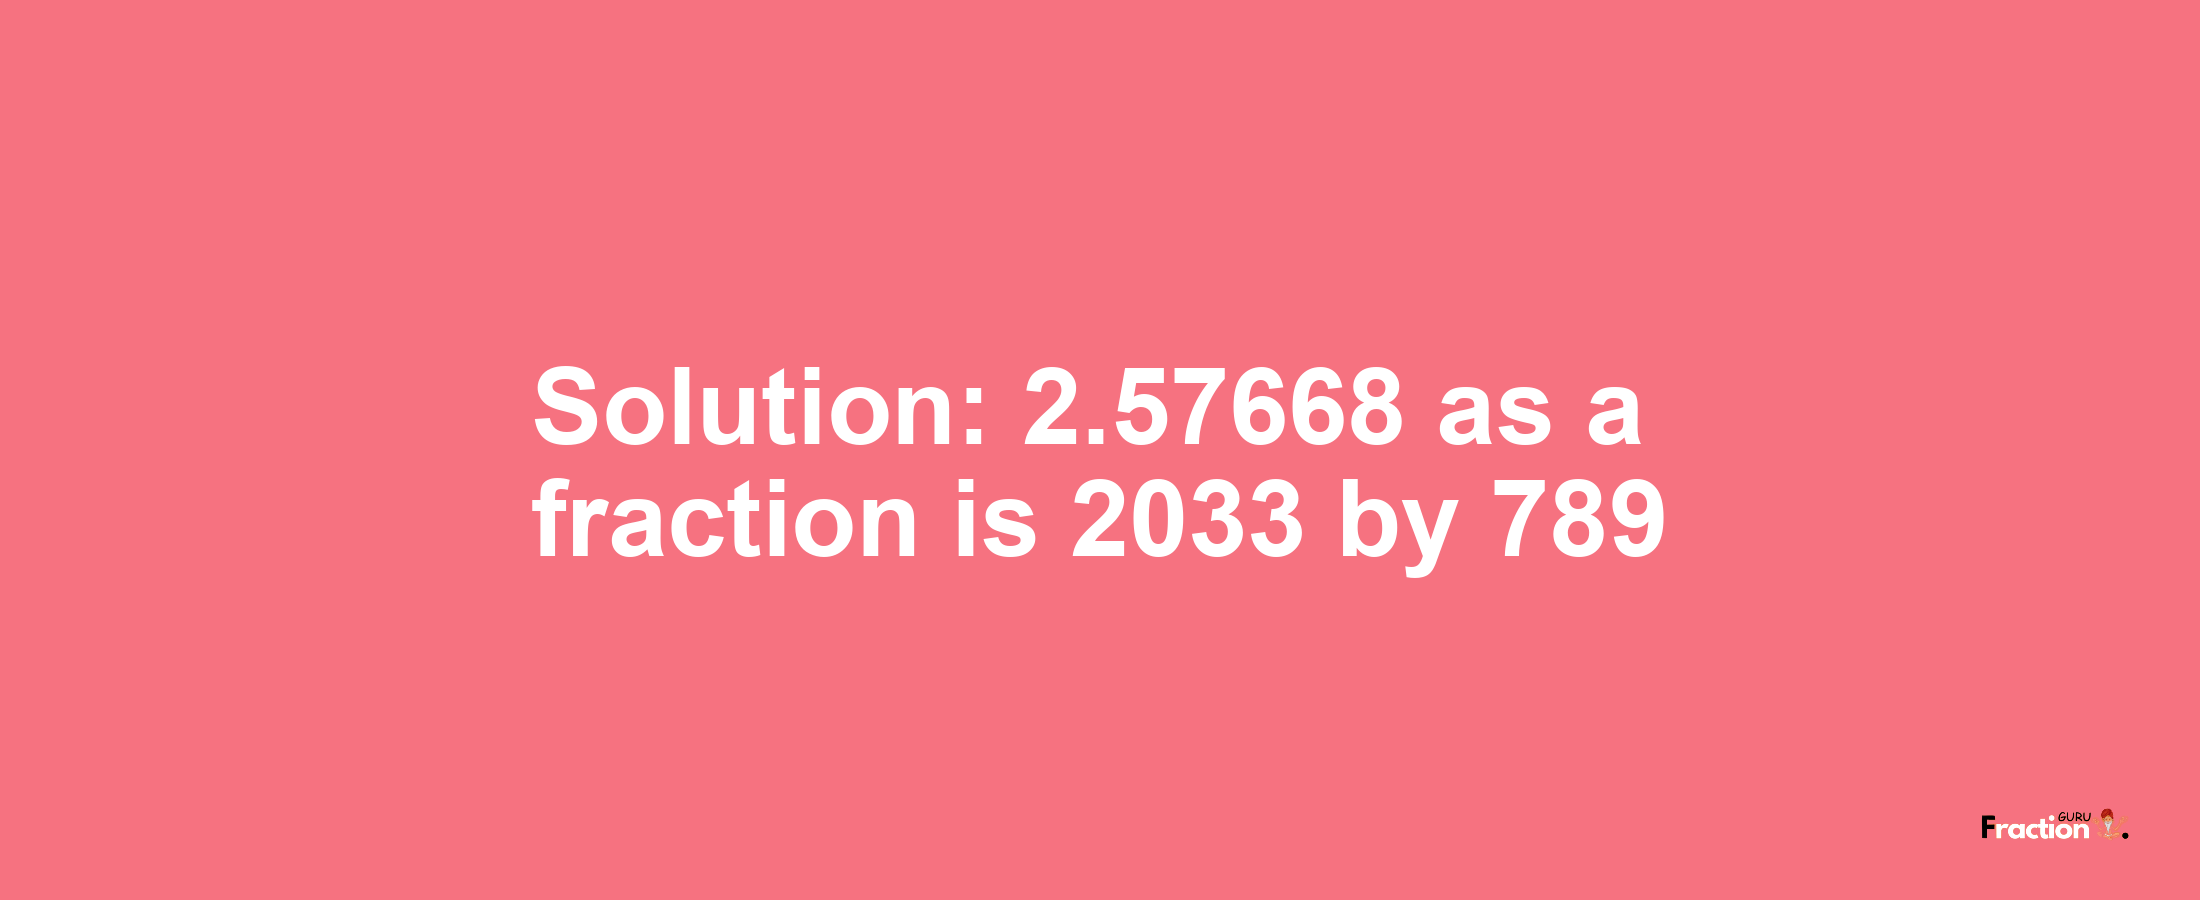 Solution:2.57668 as a fraction is 2033/789